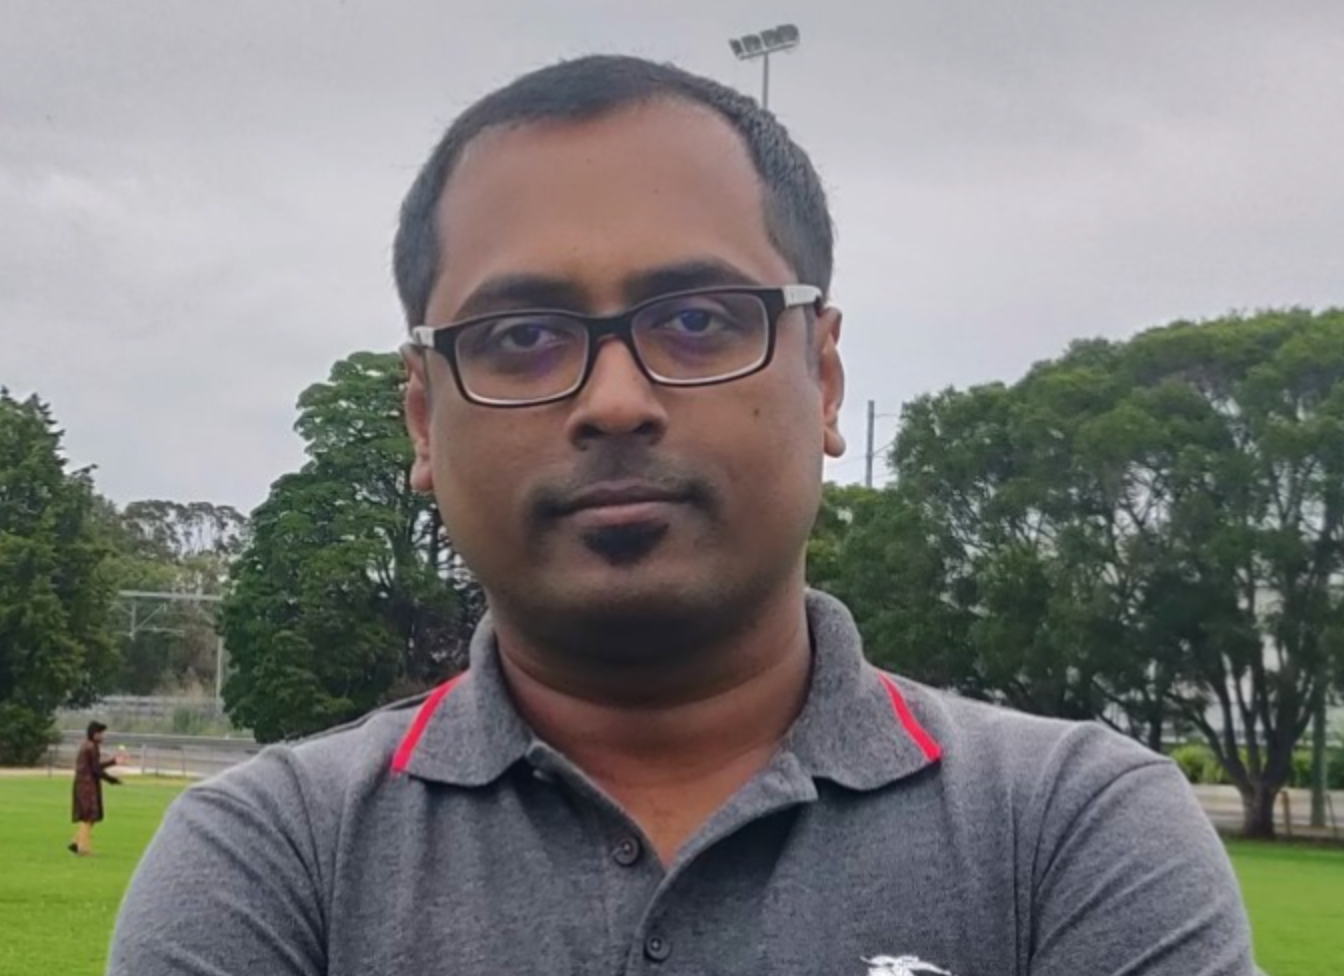 We congratulate Ripan Debnath on taking out his PhD from UNSW and for securing a new role as a Consultant for the University of Newcastle's Institute for Regional Futures.